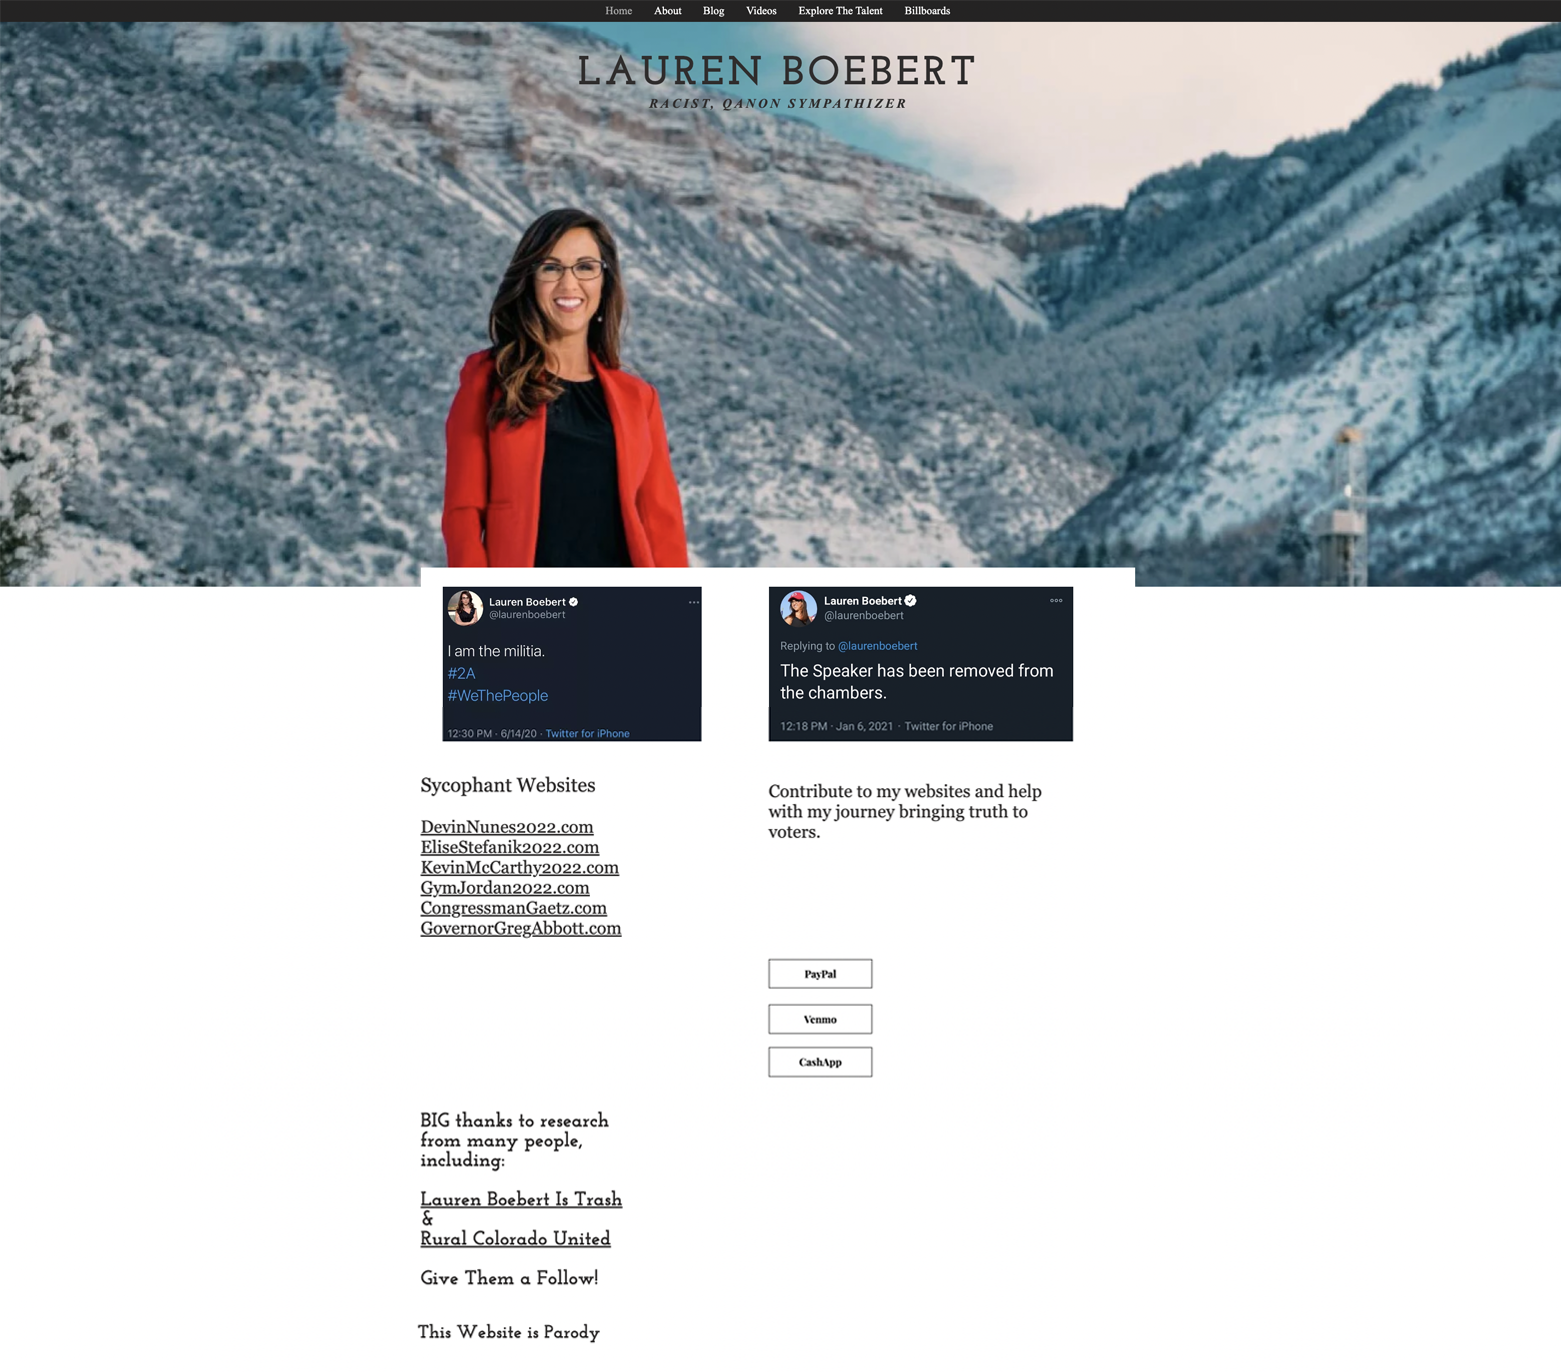 Morton’s websites, such as TheLaurenBoebert.com, use domain names that sound and look official until the satirical content throughout becomes apparent